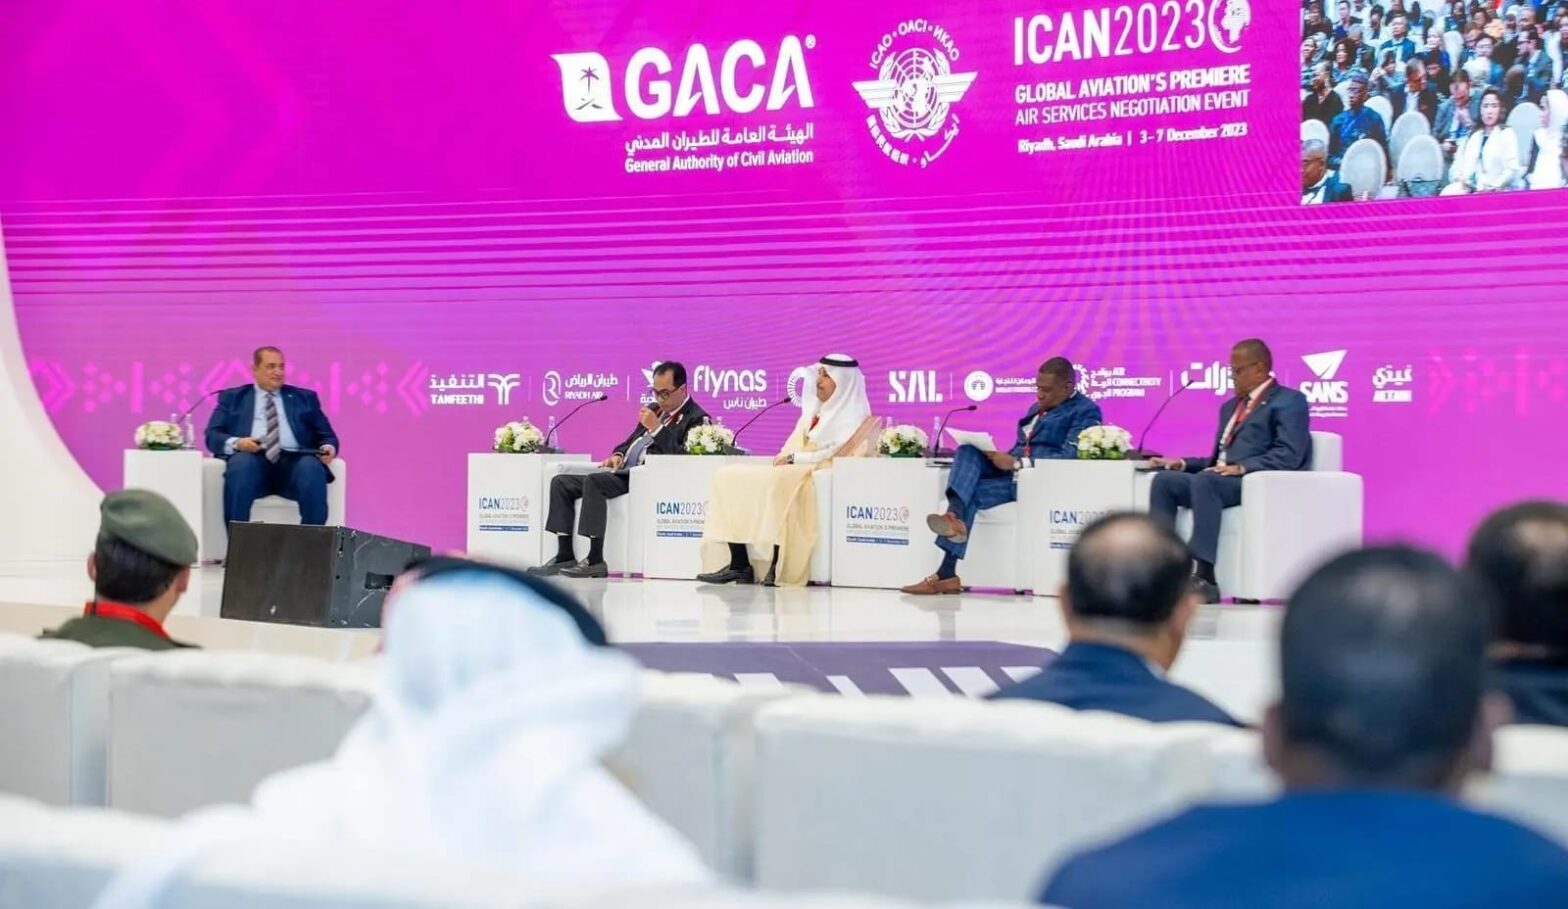 Saudi minister engages global aviation leaders at ICAN 2023, emphasizes economic impact of air transport